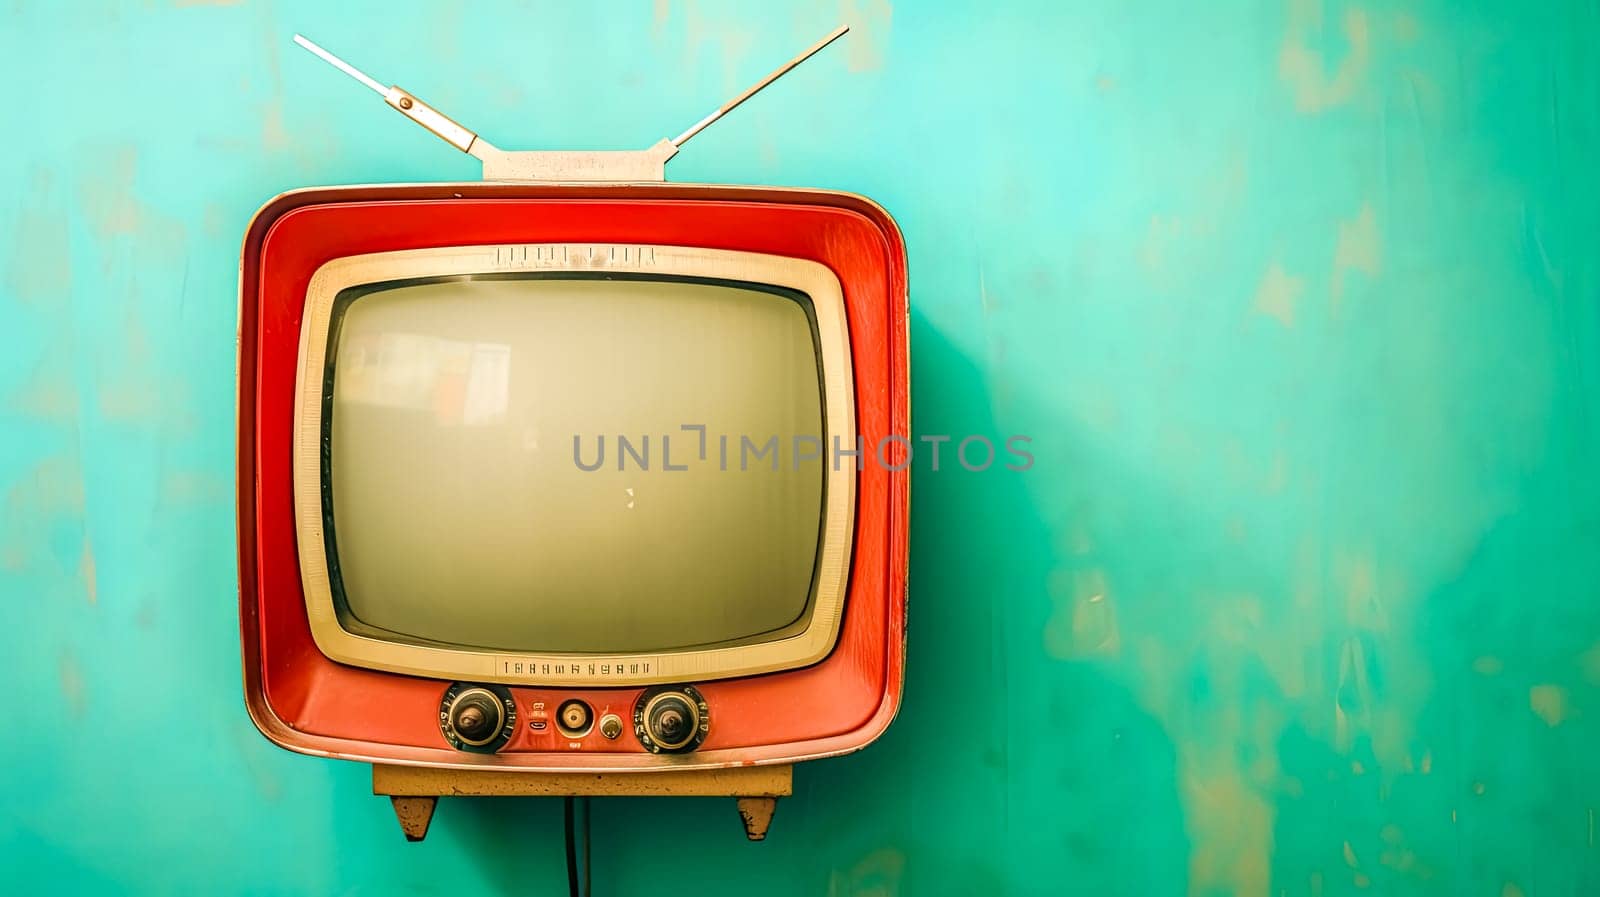 Vintage Red Television on Teal Background by Edophoto